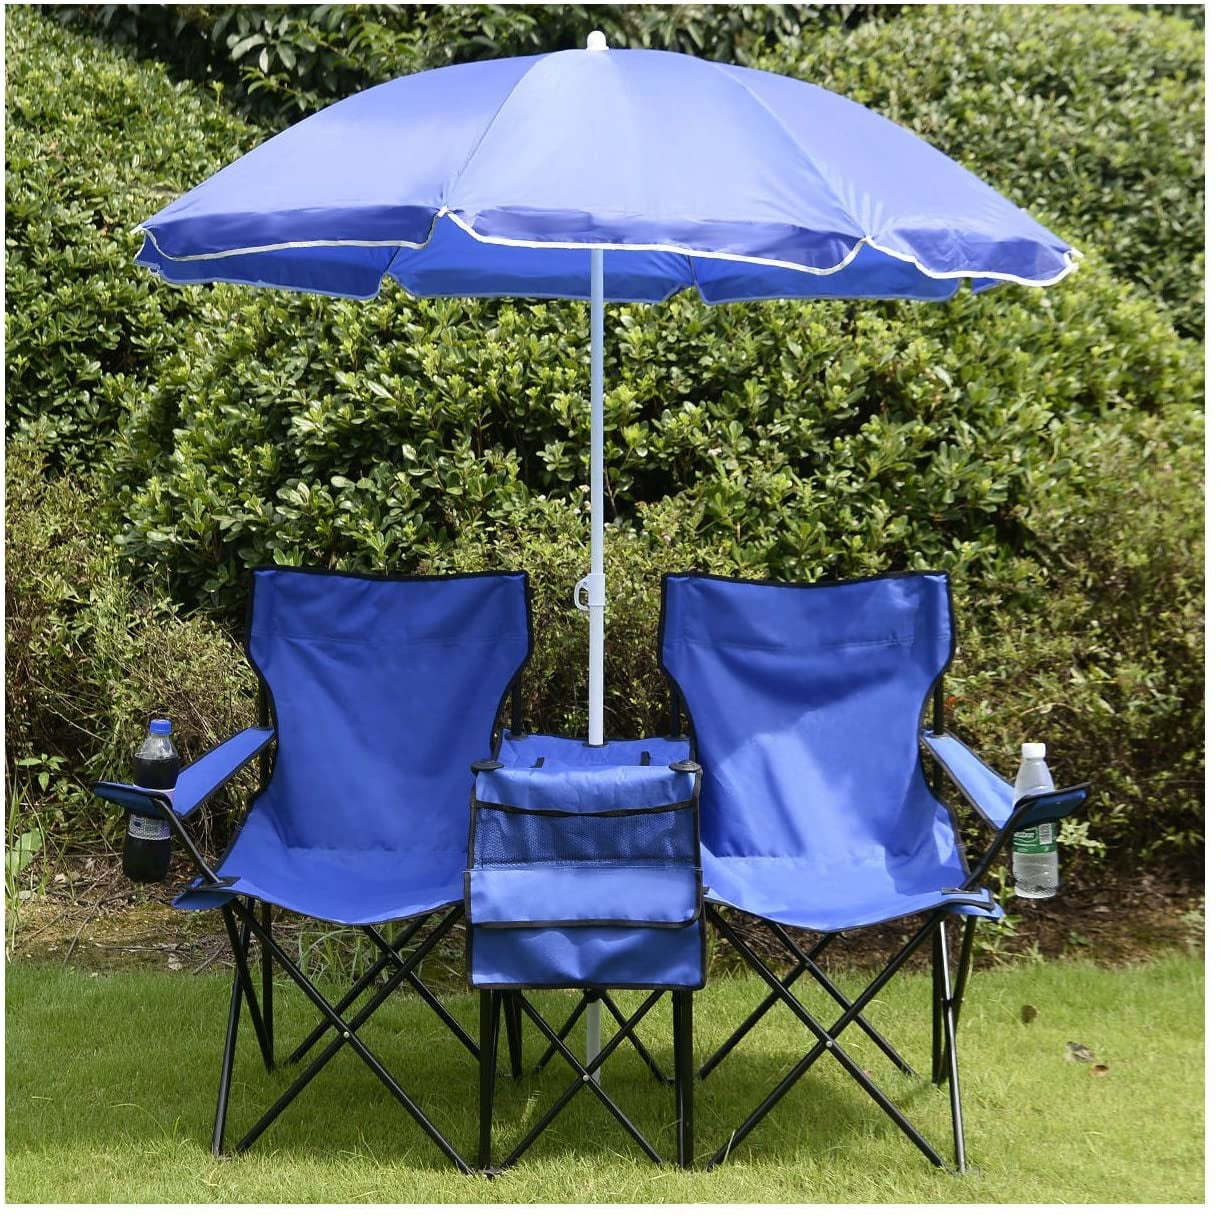 New Foldable Camping Pool Fishing Stool Double Beach Chairs with Umbrella&bag US 